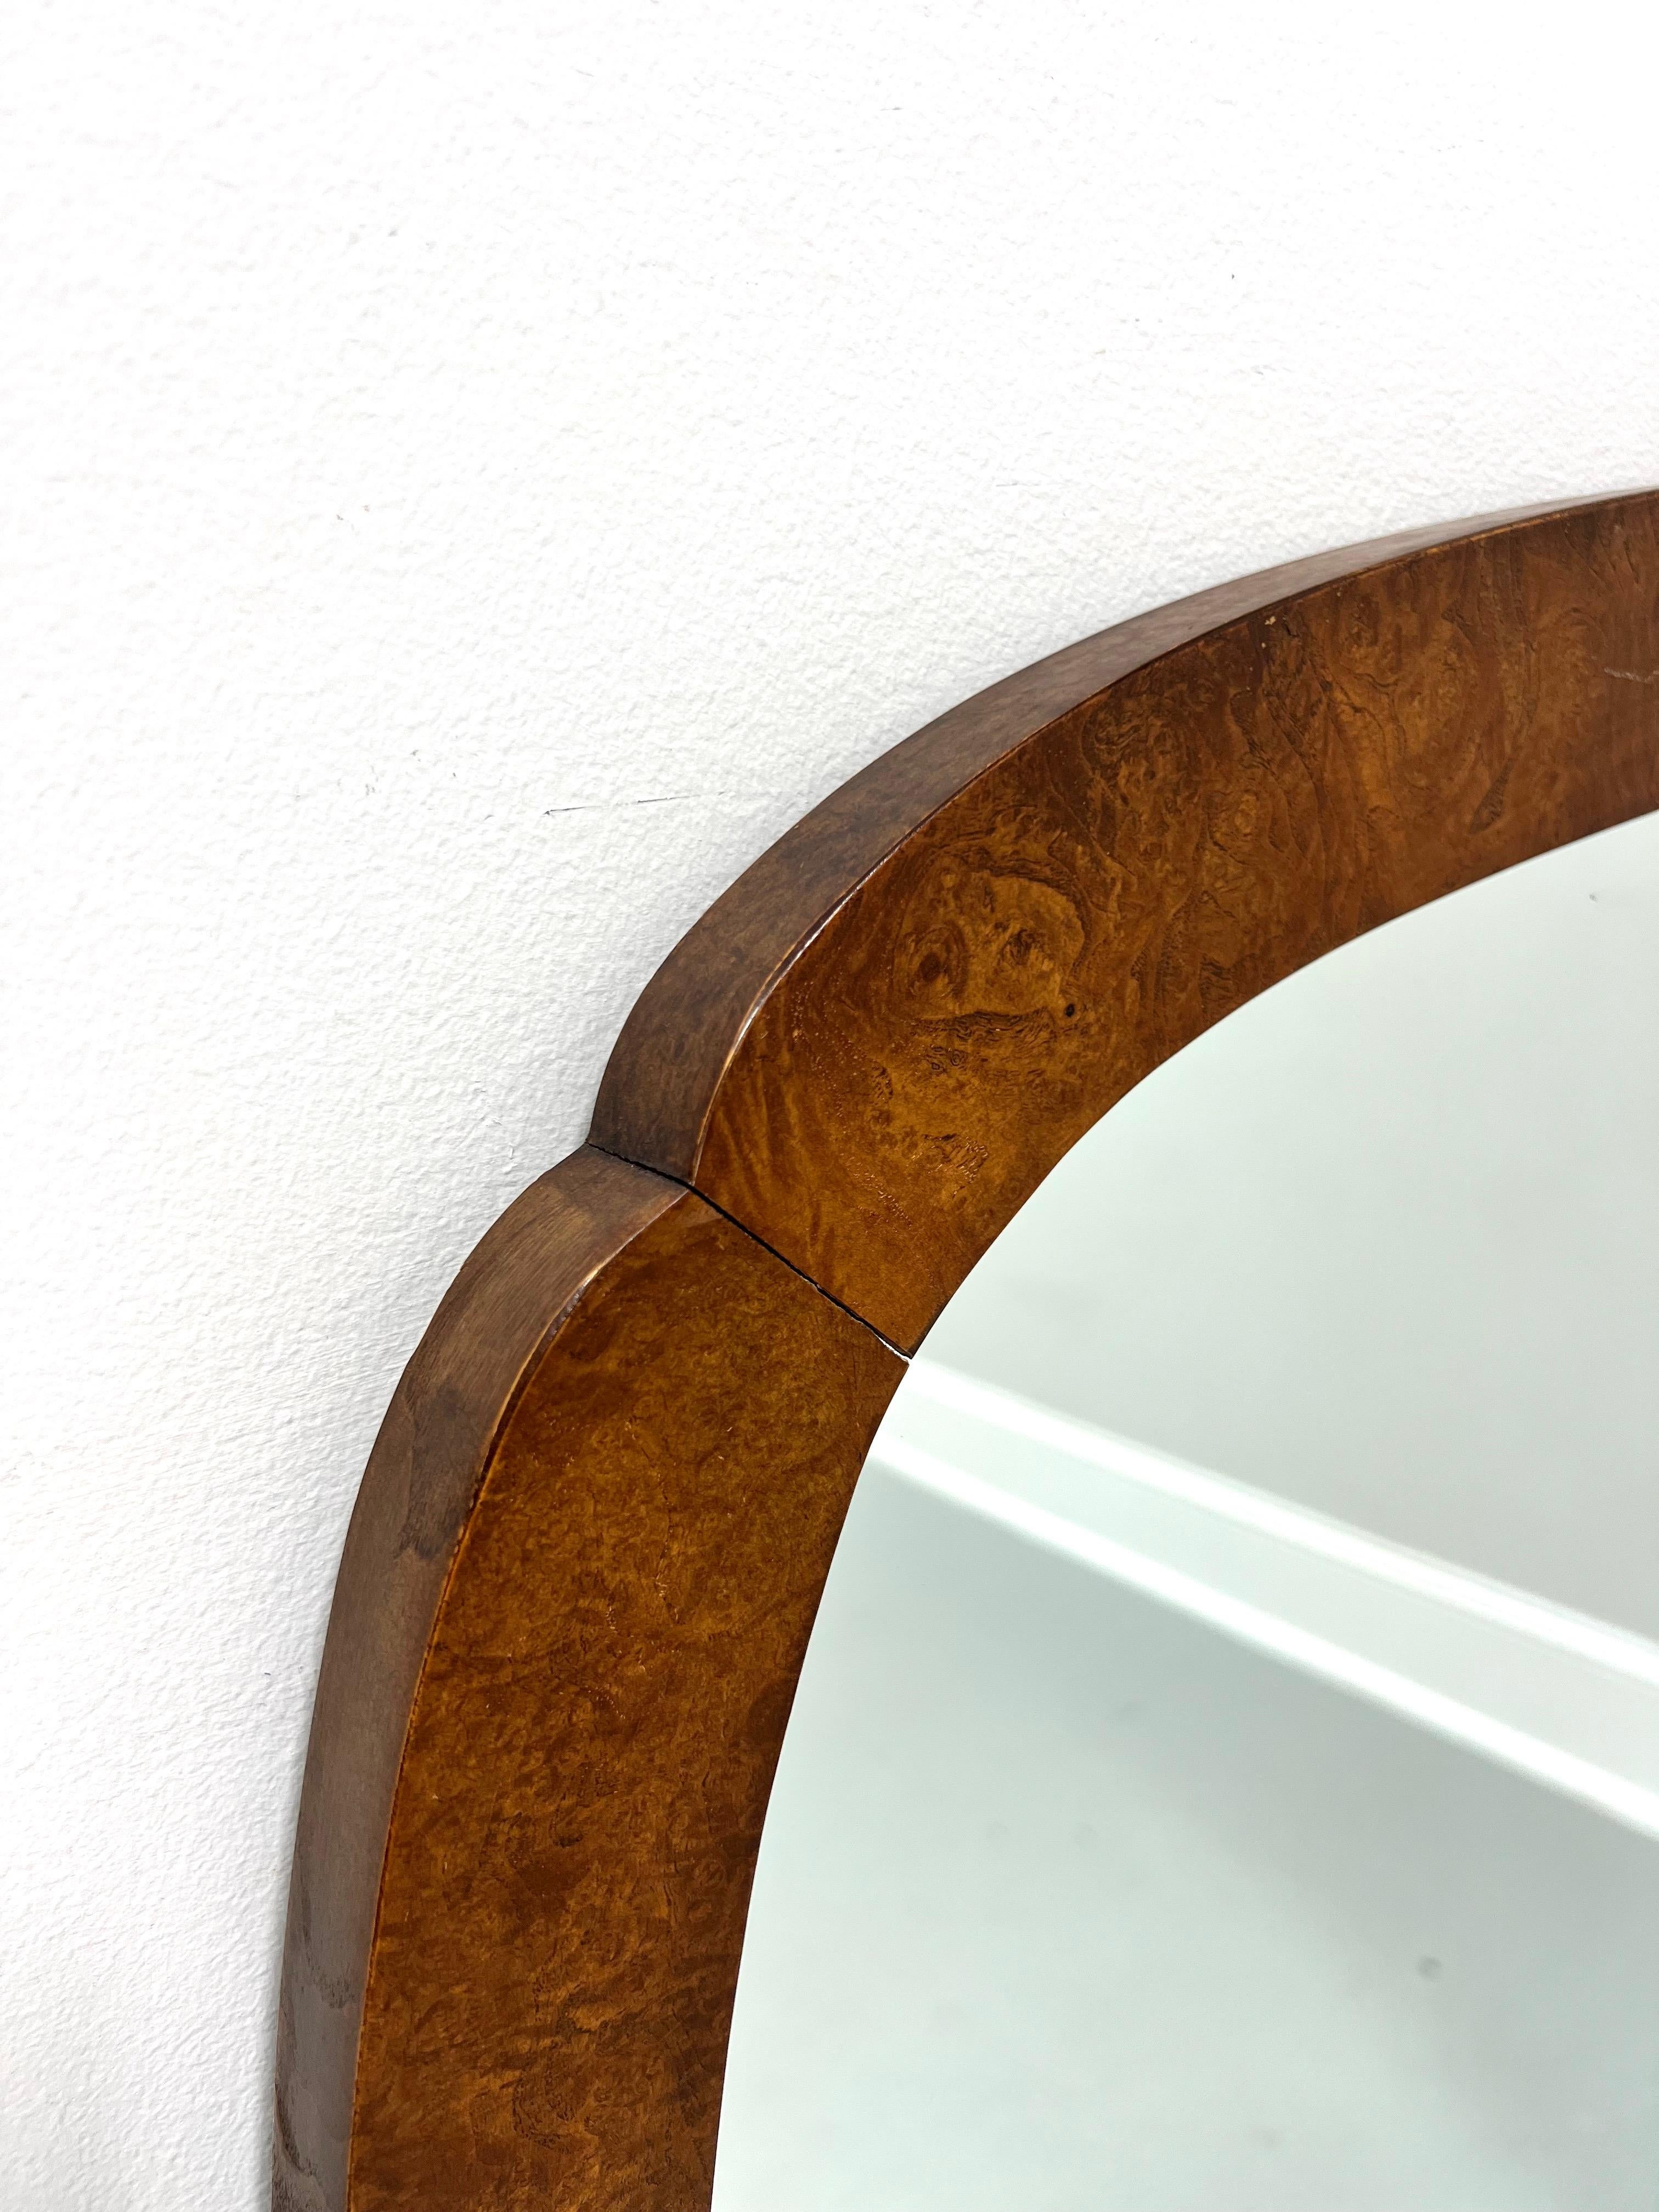 An Asian inspired dresser or wall mirror by Baker Furniture. Mirror glass in a burl walnut frame with rounded clipped corners. Made in North Carolina, USA, in the late 20th Century. 

Measures: 33.5w 1.5d 47.5h, Weighs Approximately: 38